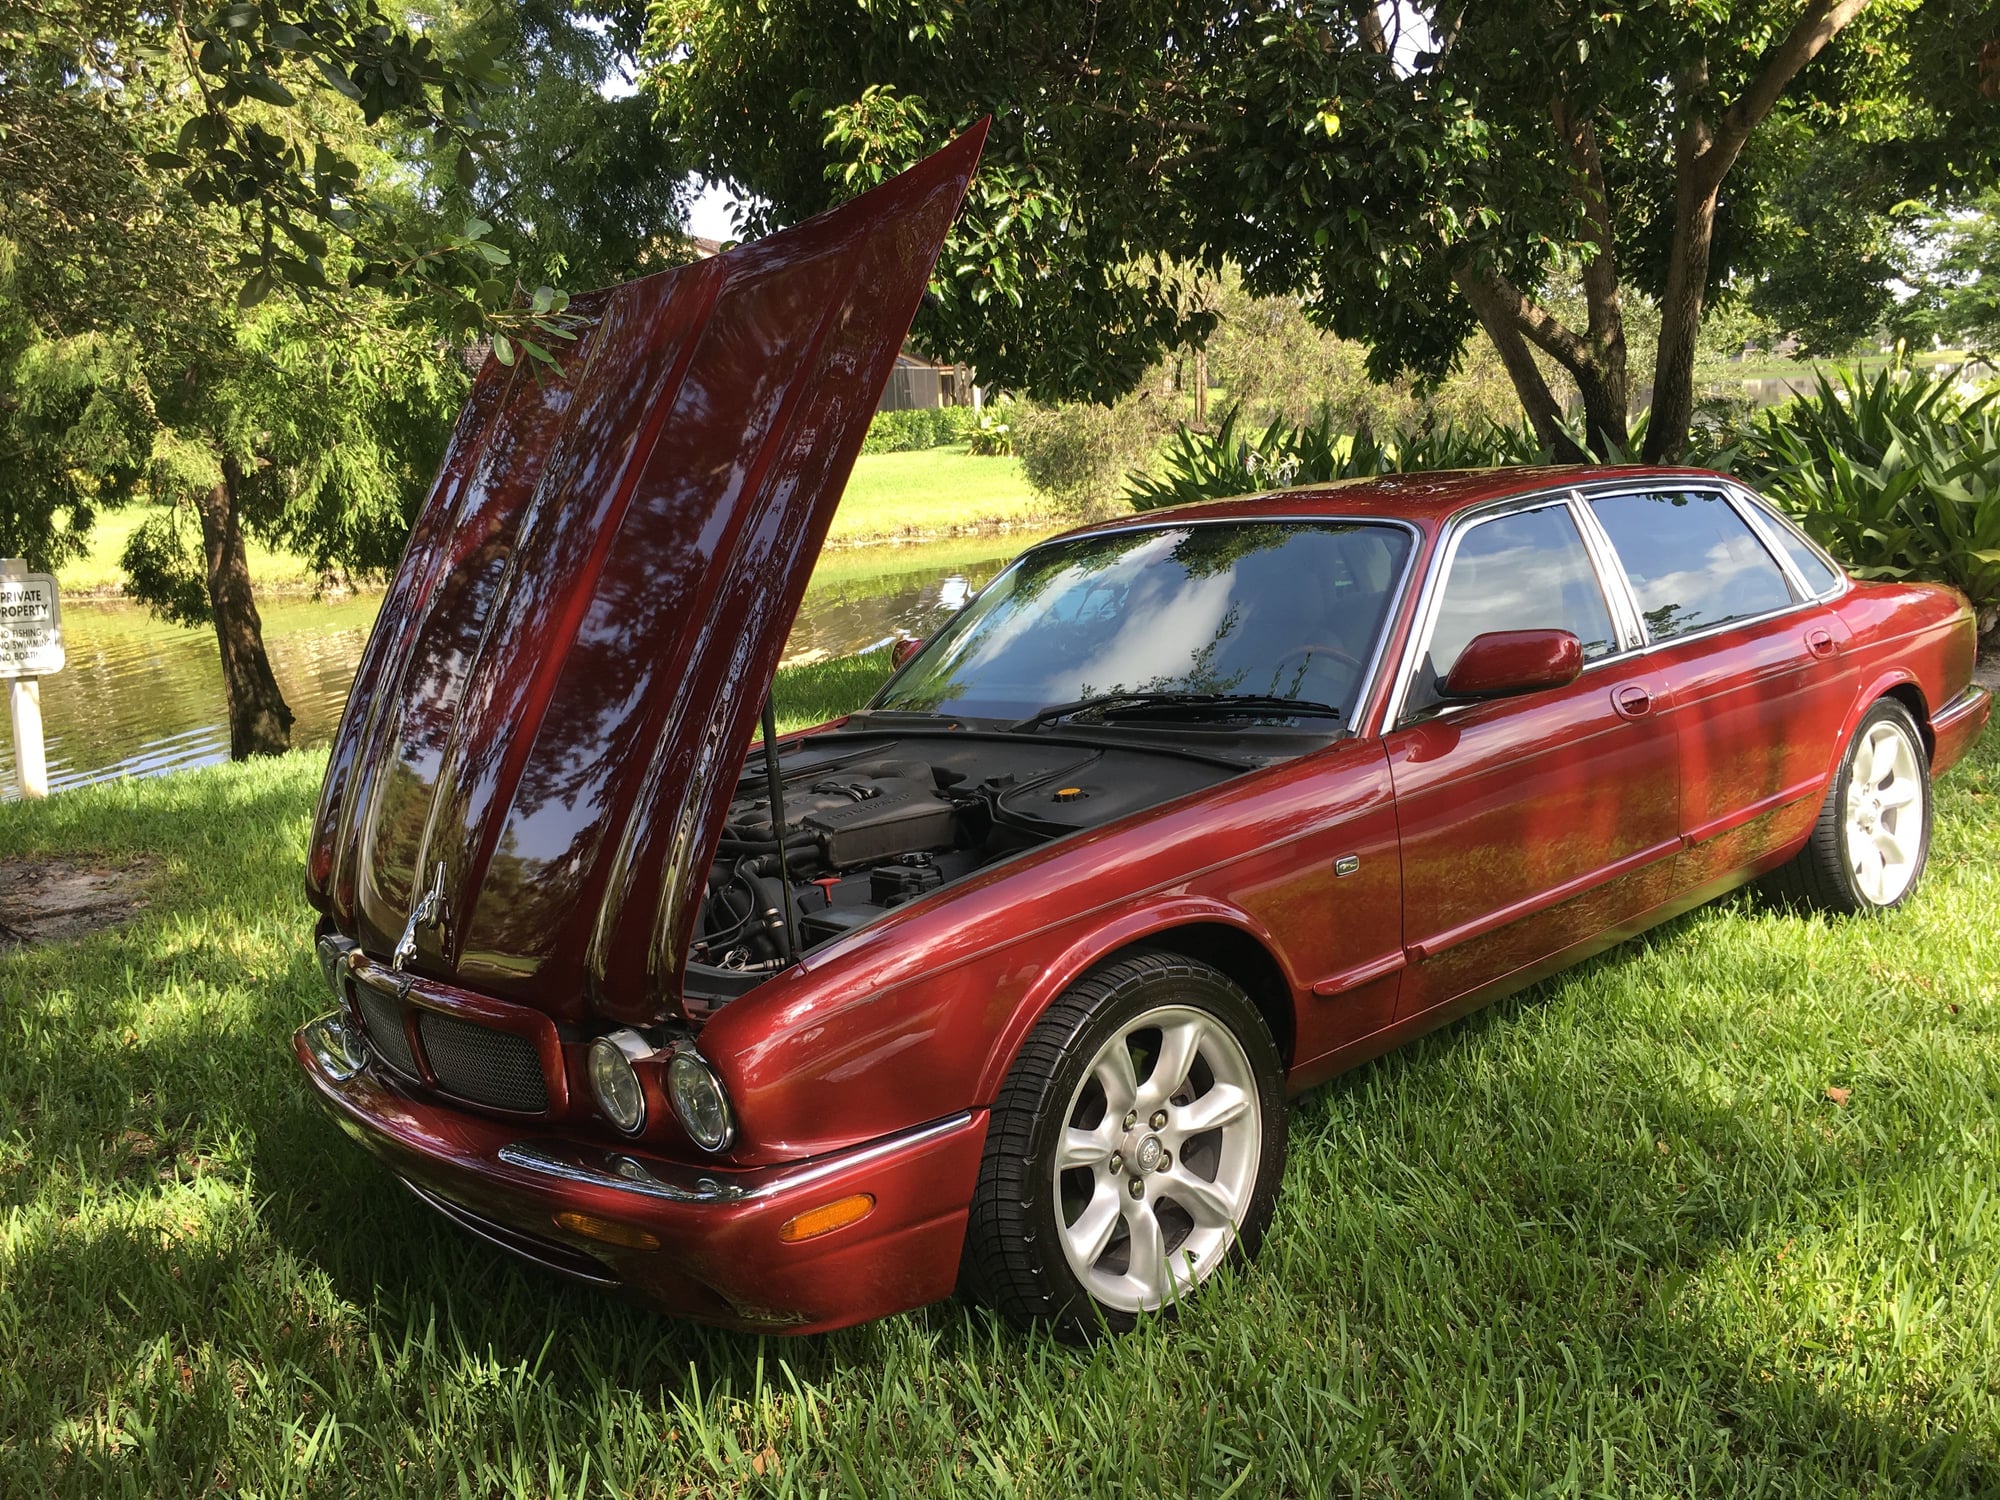 2000 Jaguar XJR - 2000 jaguar xjr in superior condition inside & out - Used - VIN SAJDA15BXYMF14459 - 79,950 Miles - 8 cyl - 2WD - Automatic - Sedan - Red - Pembroke Pines, FL 33026, United States